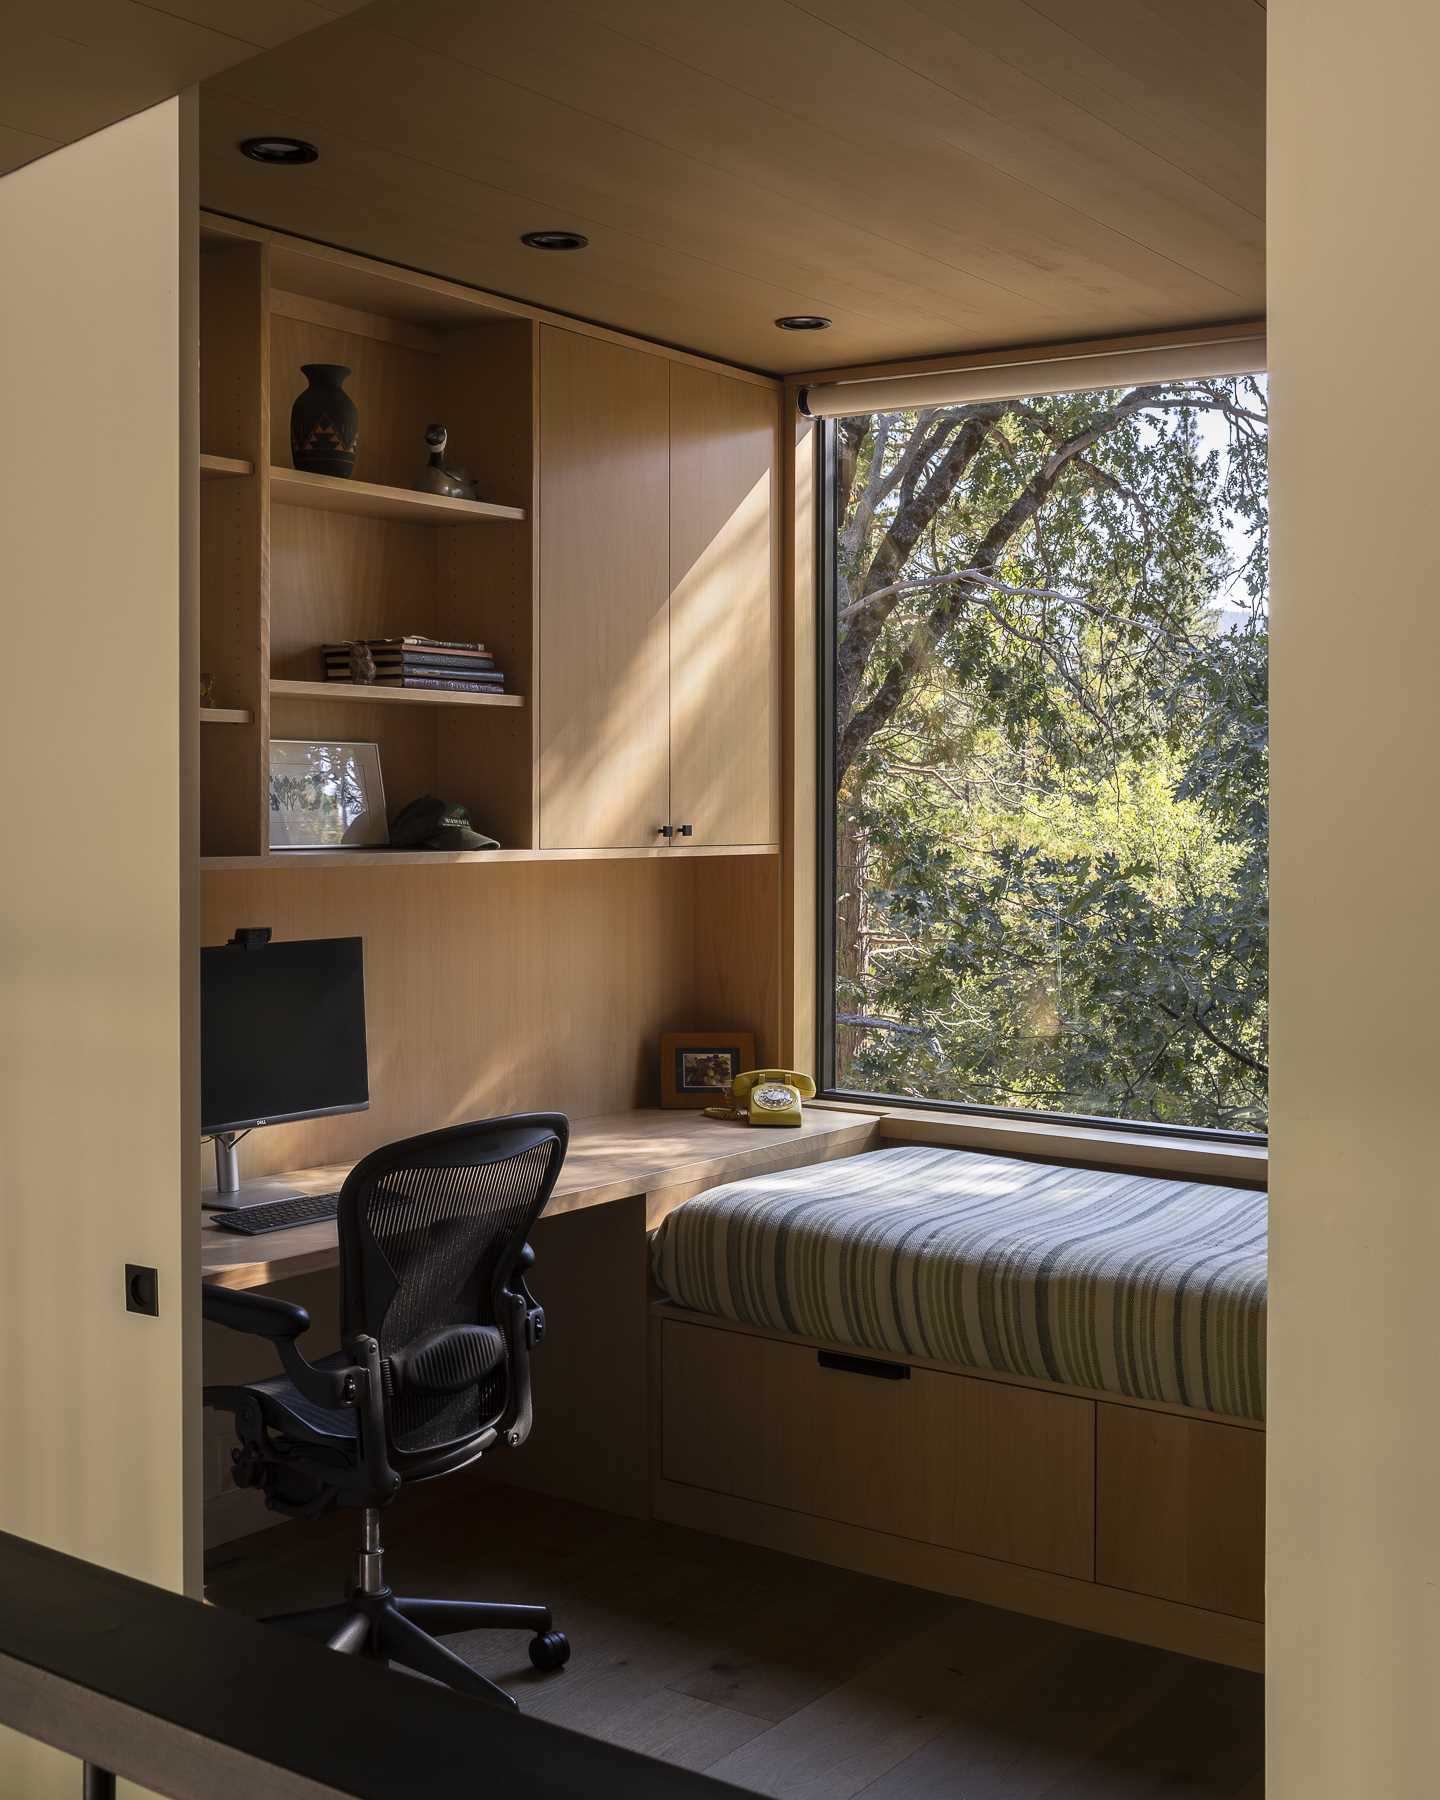 A small room with a built-in desk with shelving and cabinetry.